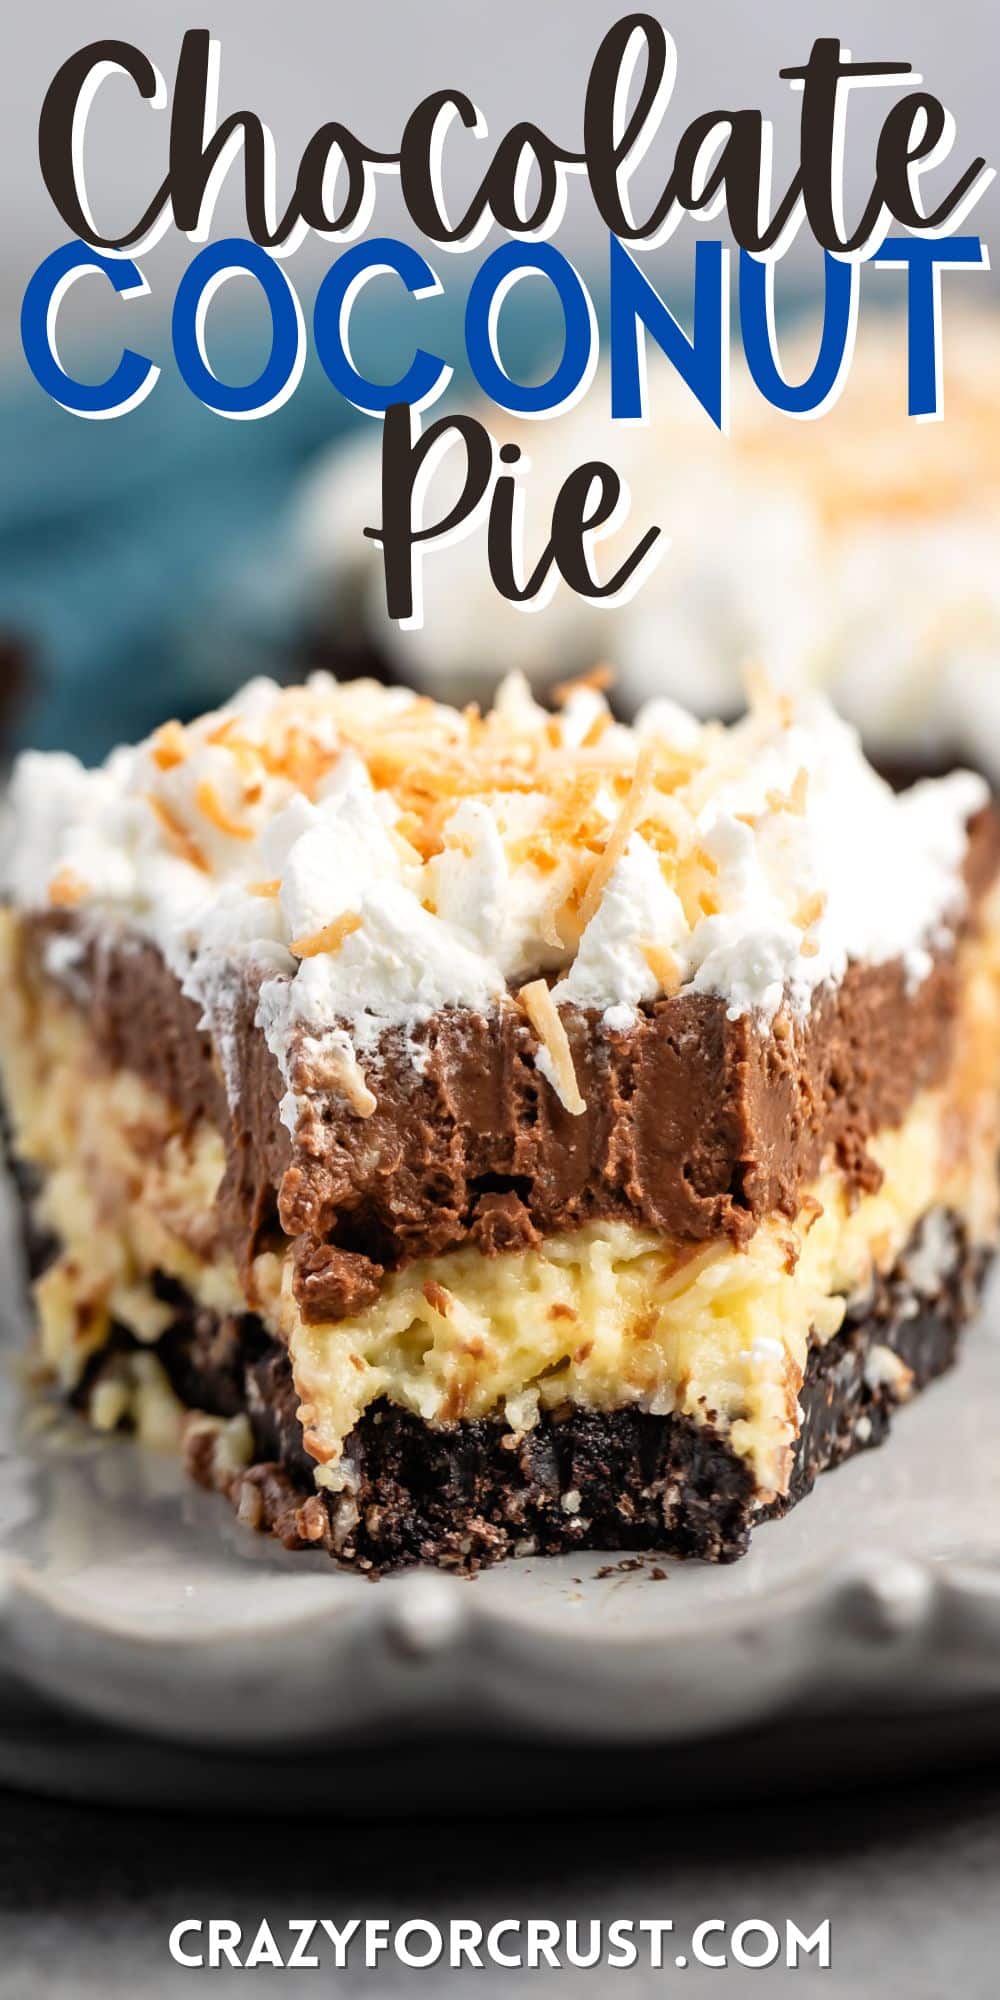 sliced pie with whipped cream and coconut on top with words on the image.